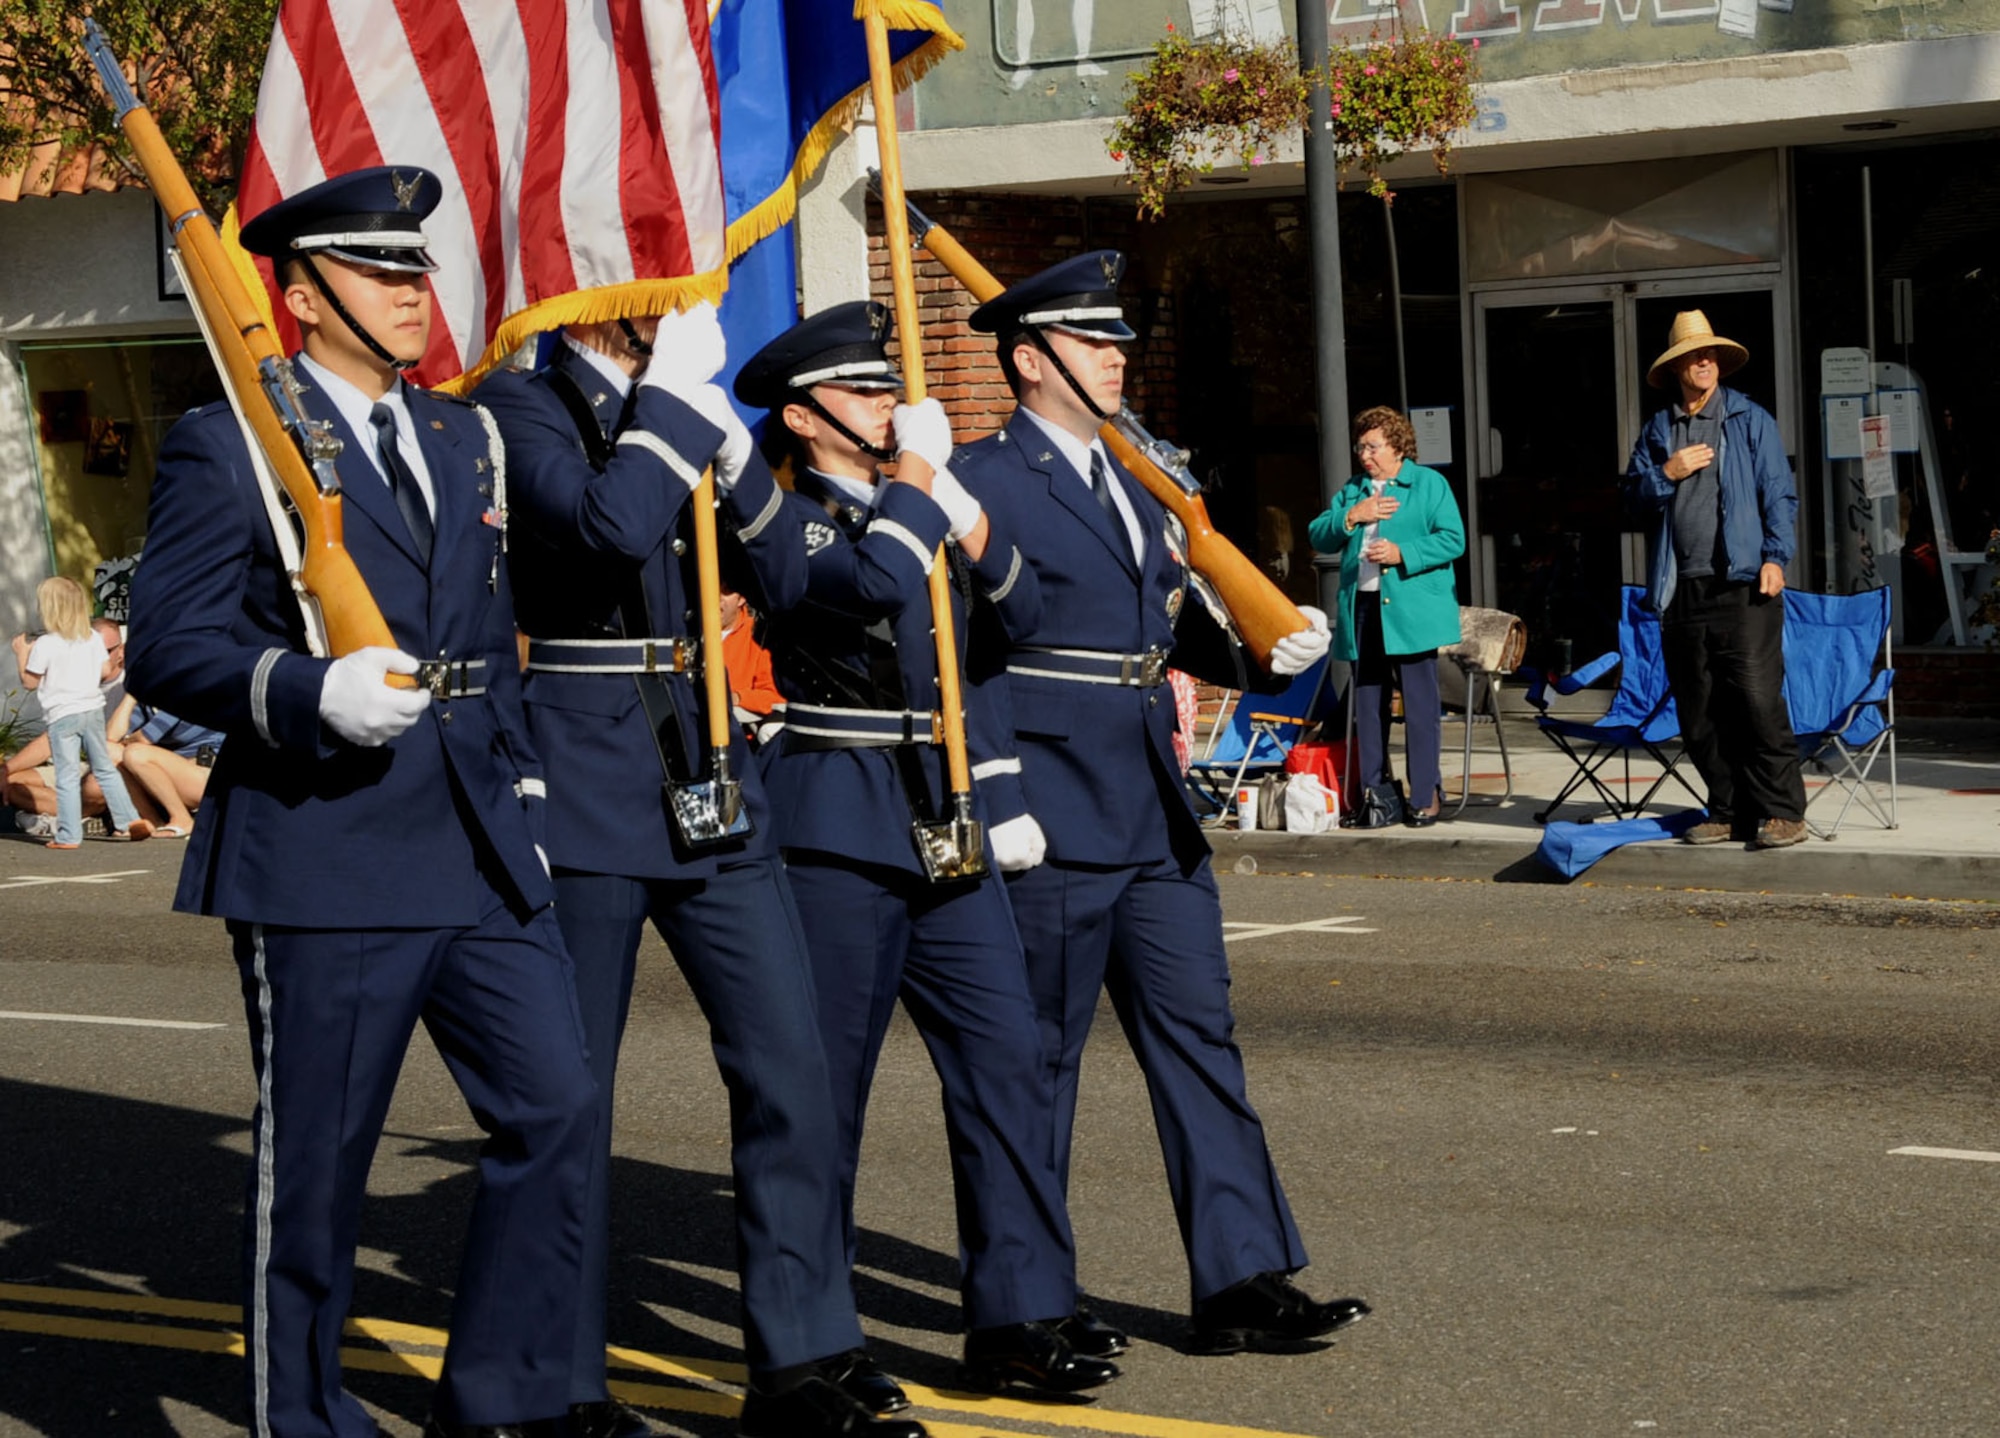 A honor guard from Los Angeles Air Force Base leads El Segundo’s annual Holiday Parade, Dec. 13. (Photo by Lou Hernandez)